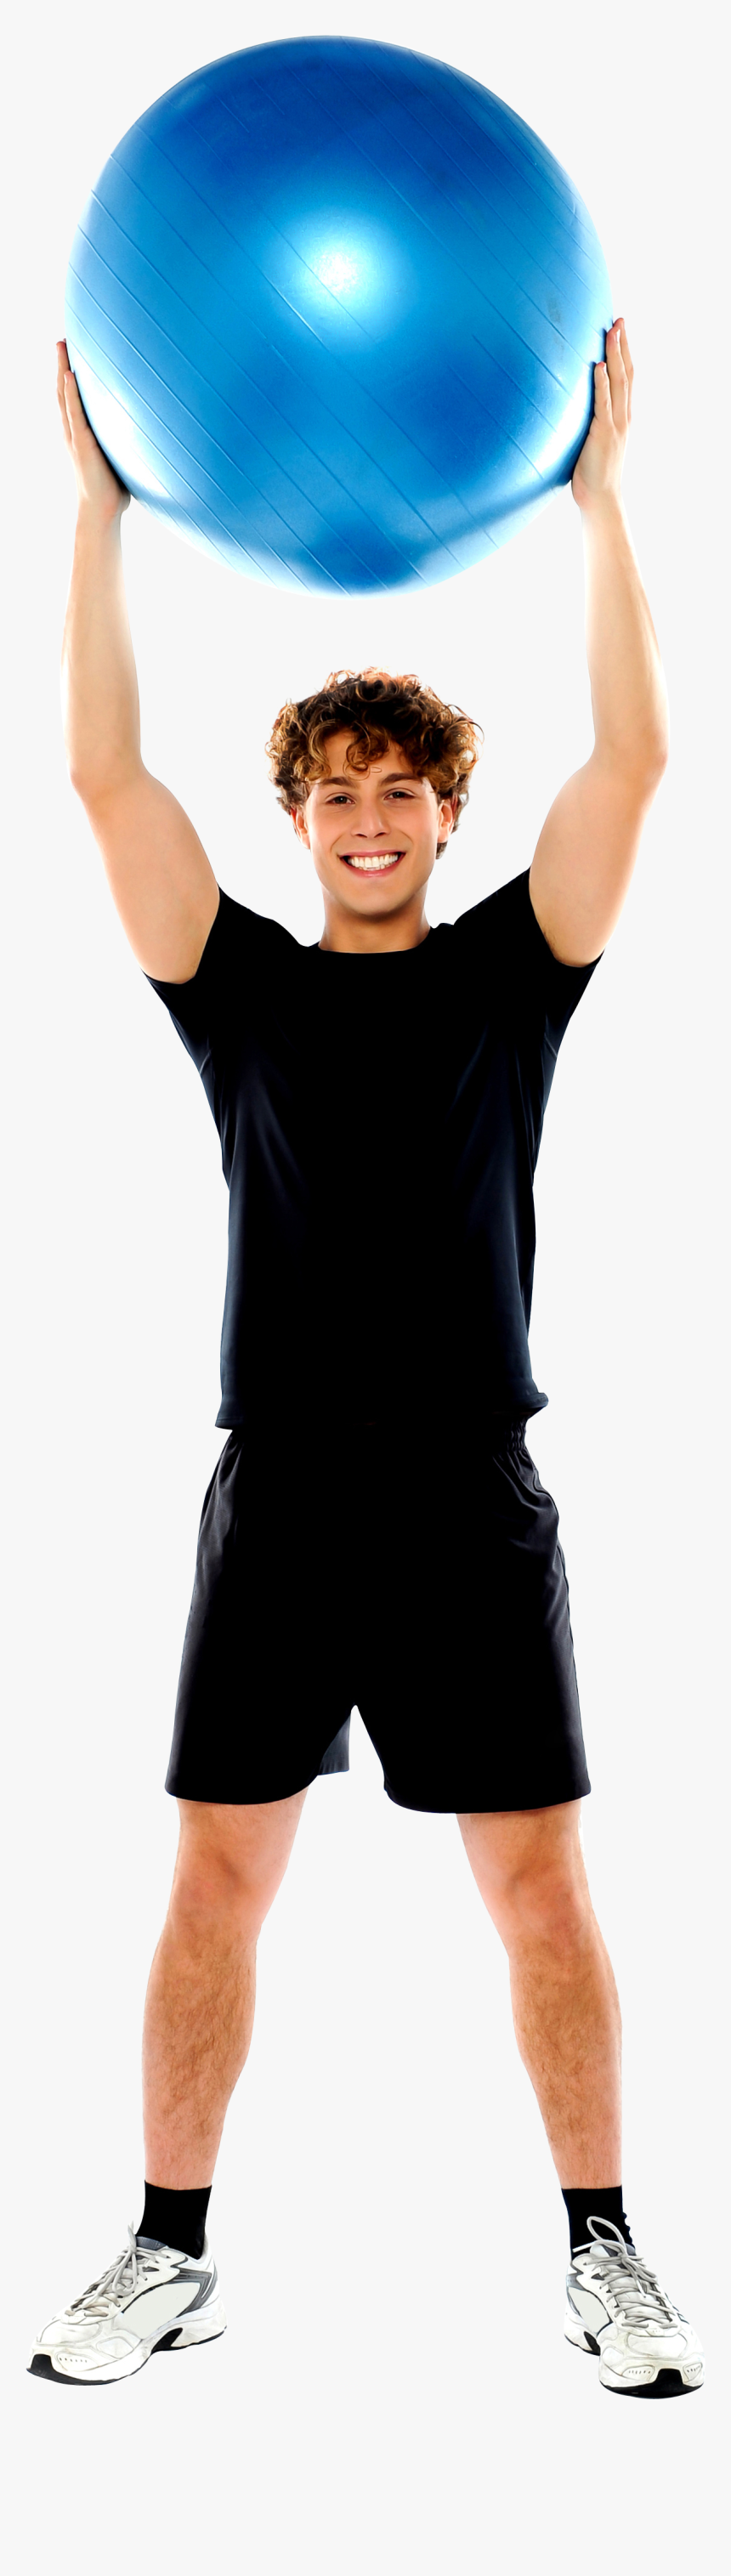 Fitness People Png - Man Fitness Transparent, Png Download, Free Download